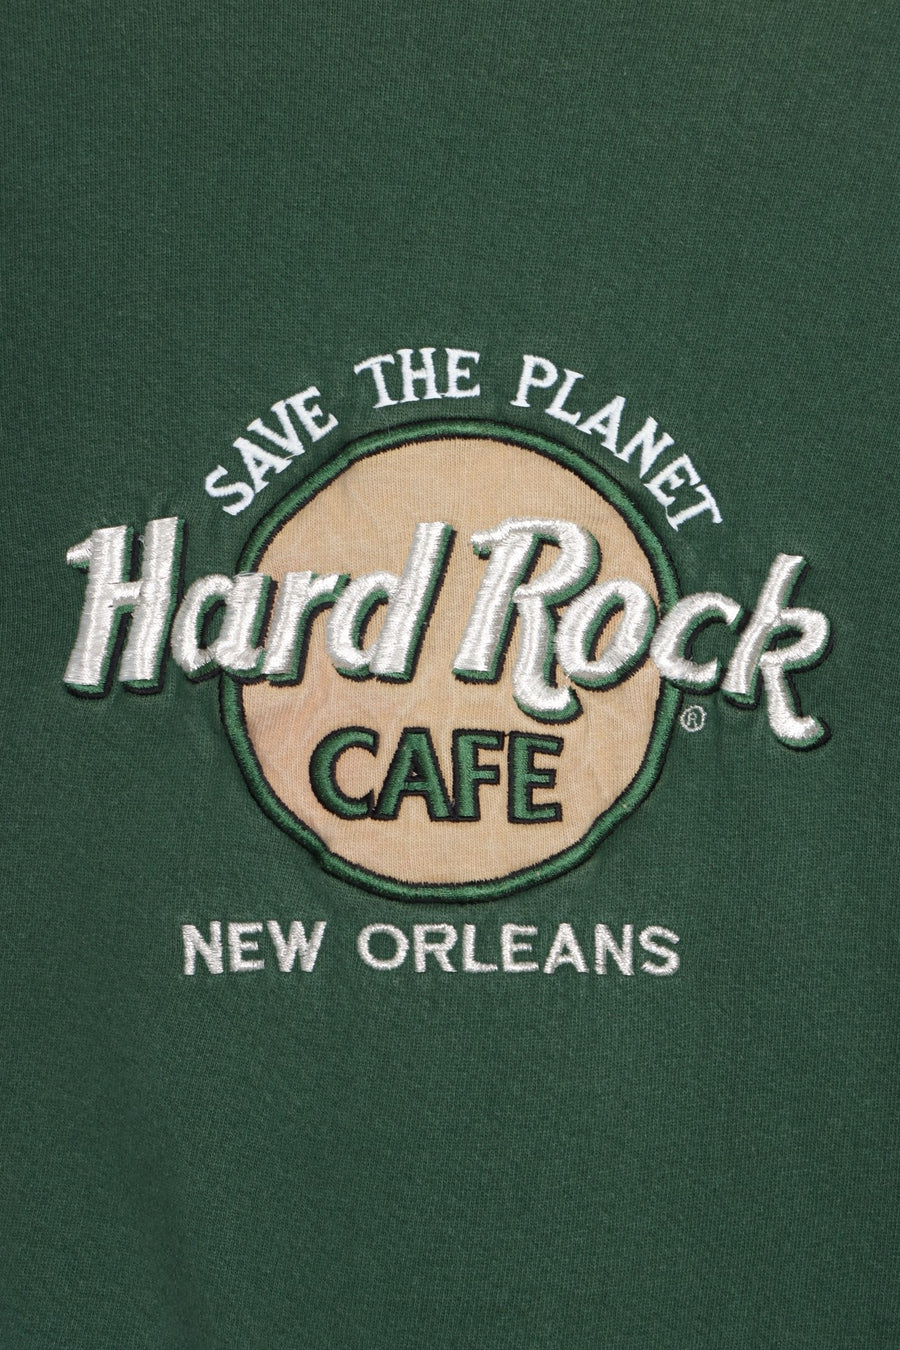 HARD ROCK CAFE "Save The Planet" Embroidered Green Sweatshirt USA Made (L-XL)